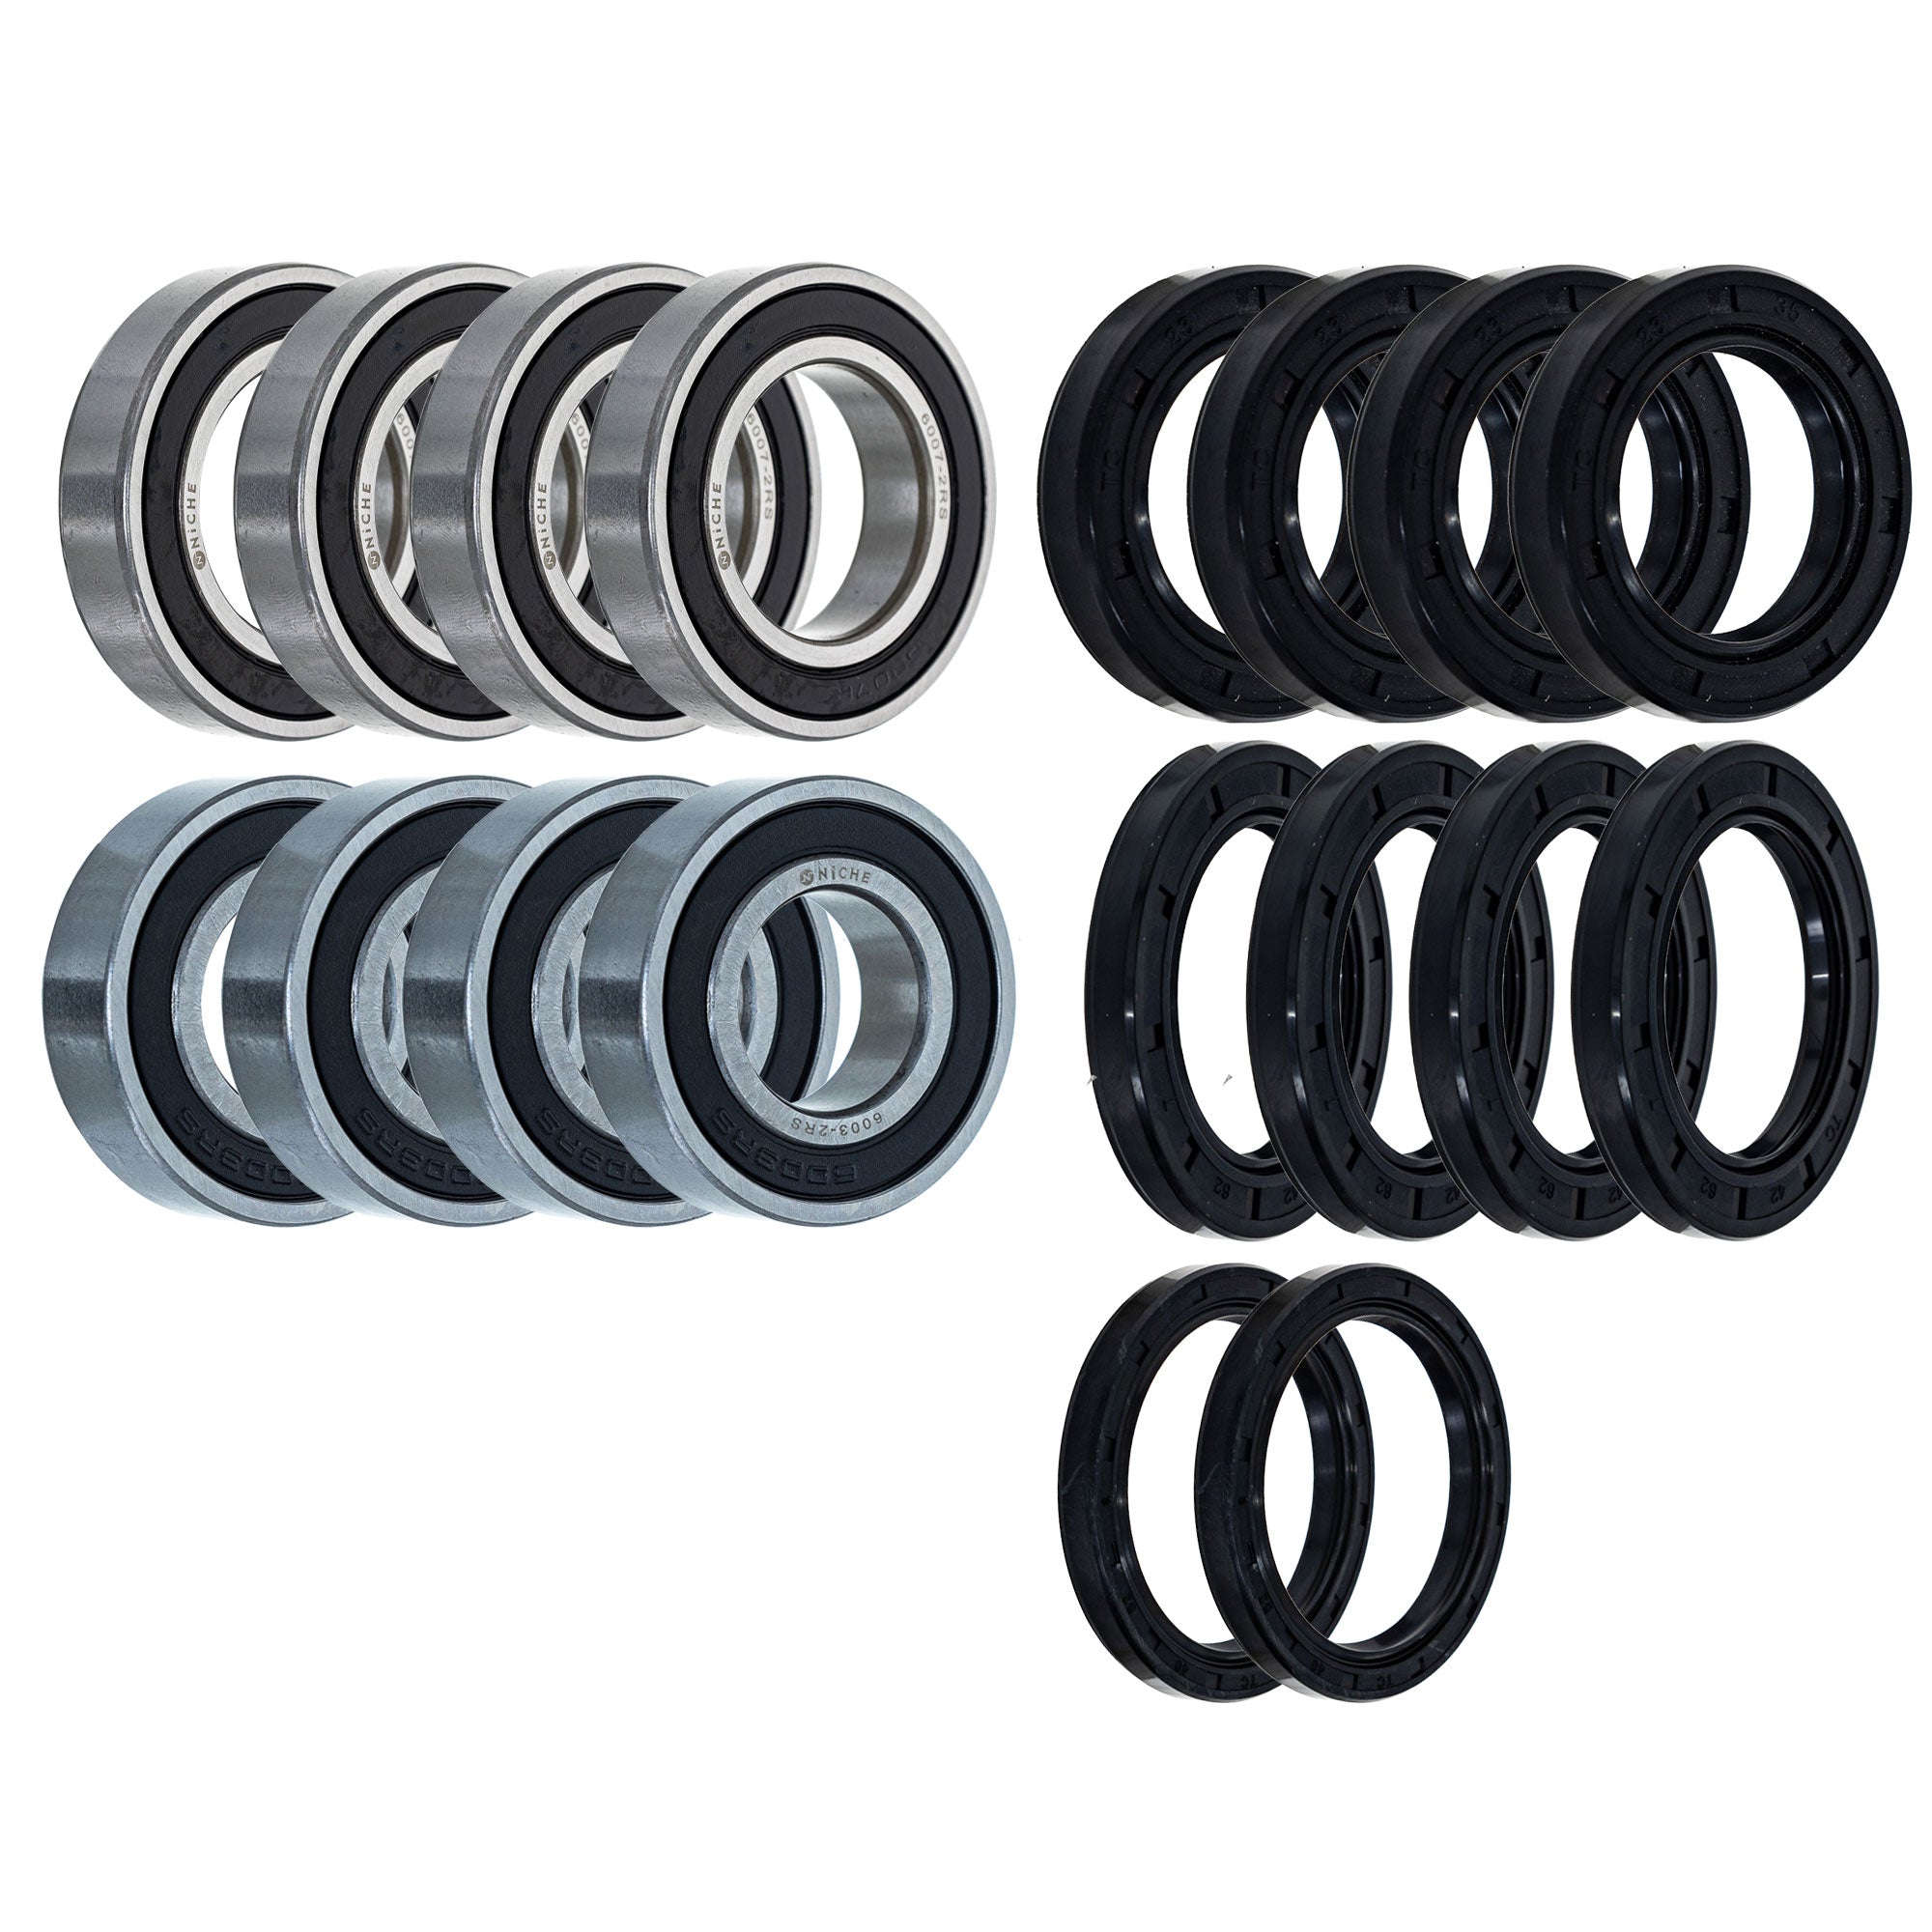 Wheel Bearing Seal Kit for zOTHER Grizzly NICHE MK1008432